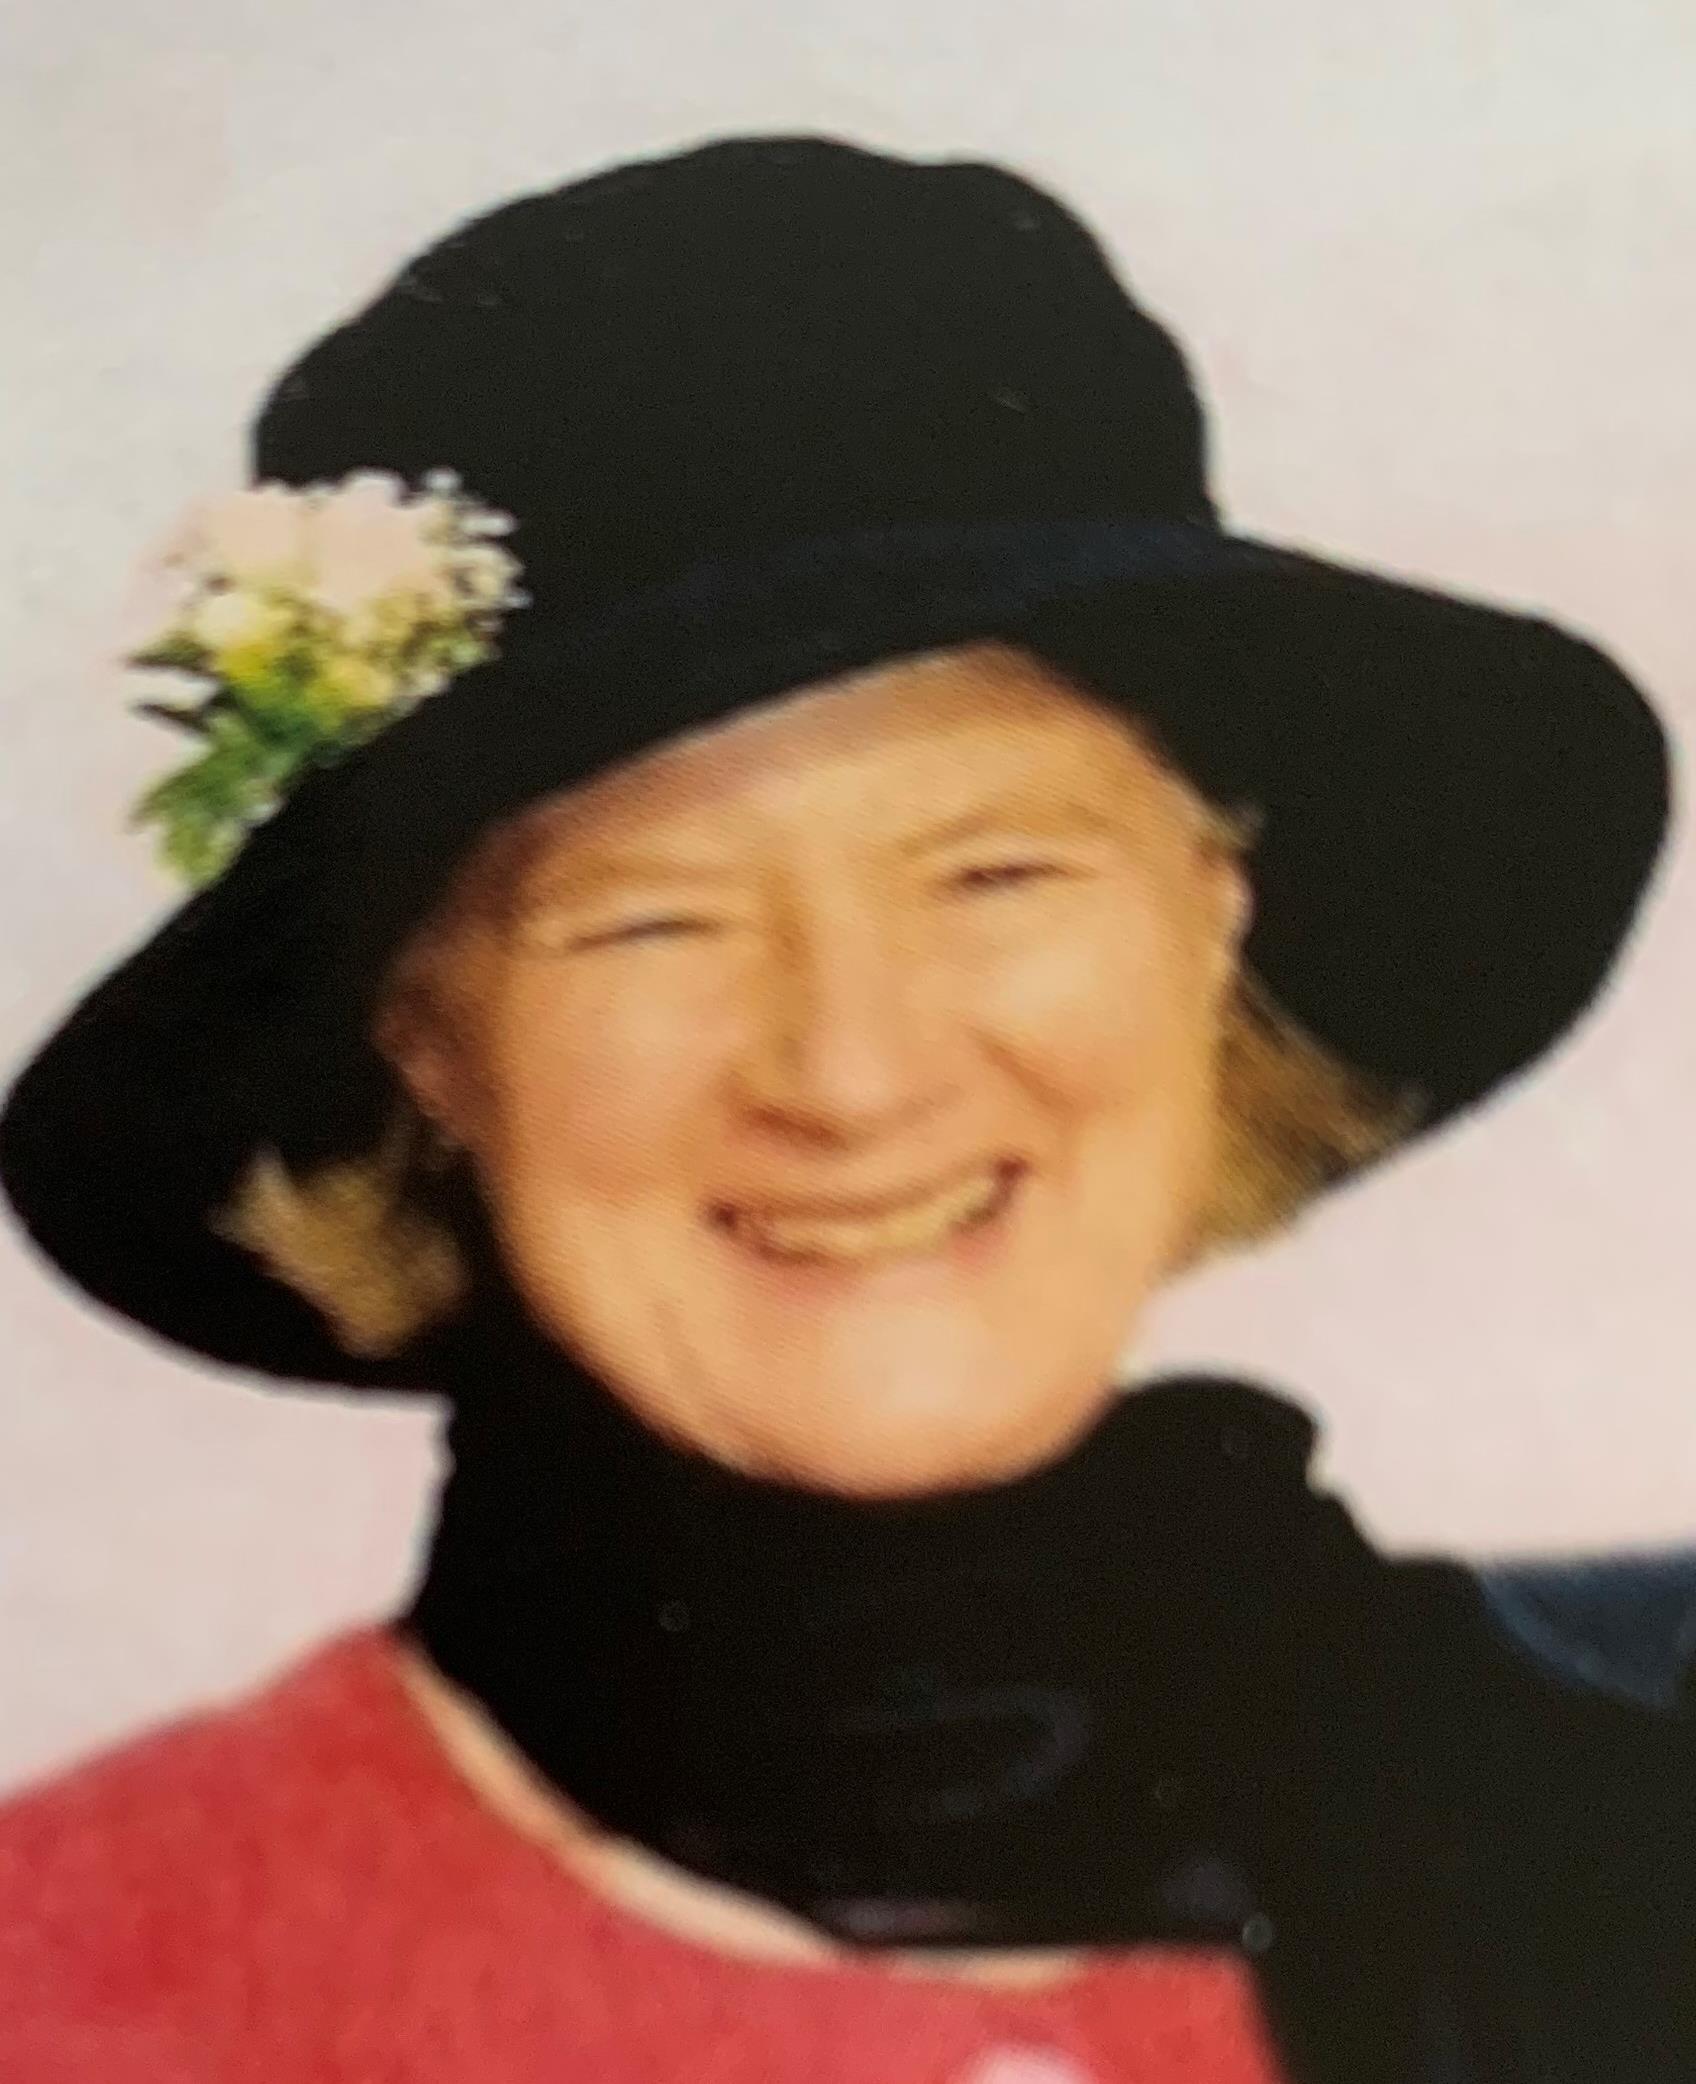 Funeral Notice For Rosalind Mary Ward